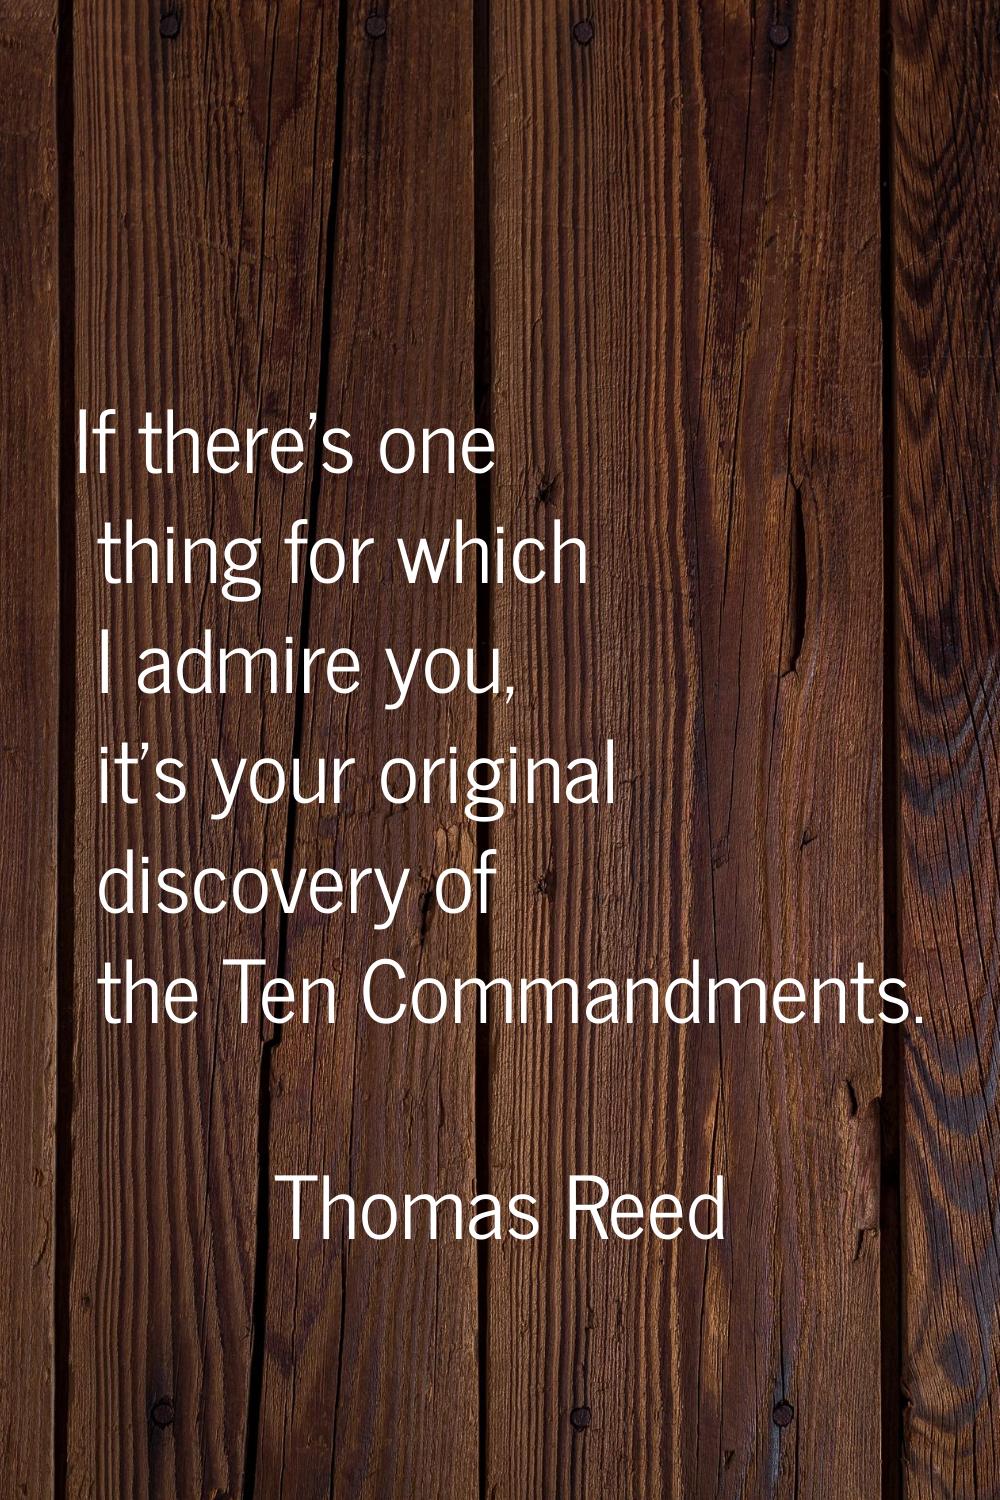 If there's one thing for which I admire you, it's your original discovery of the Ten Commandments.